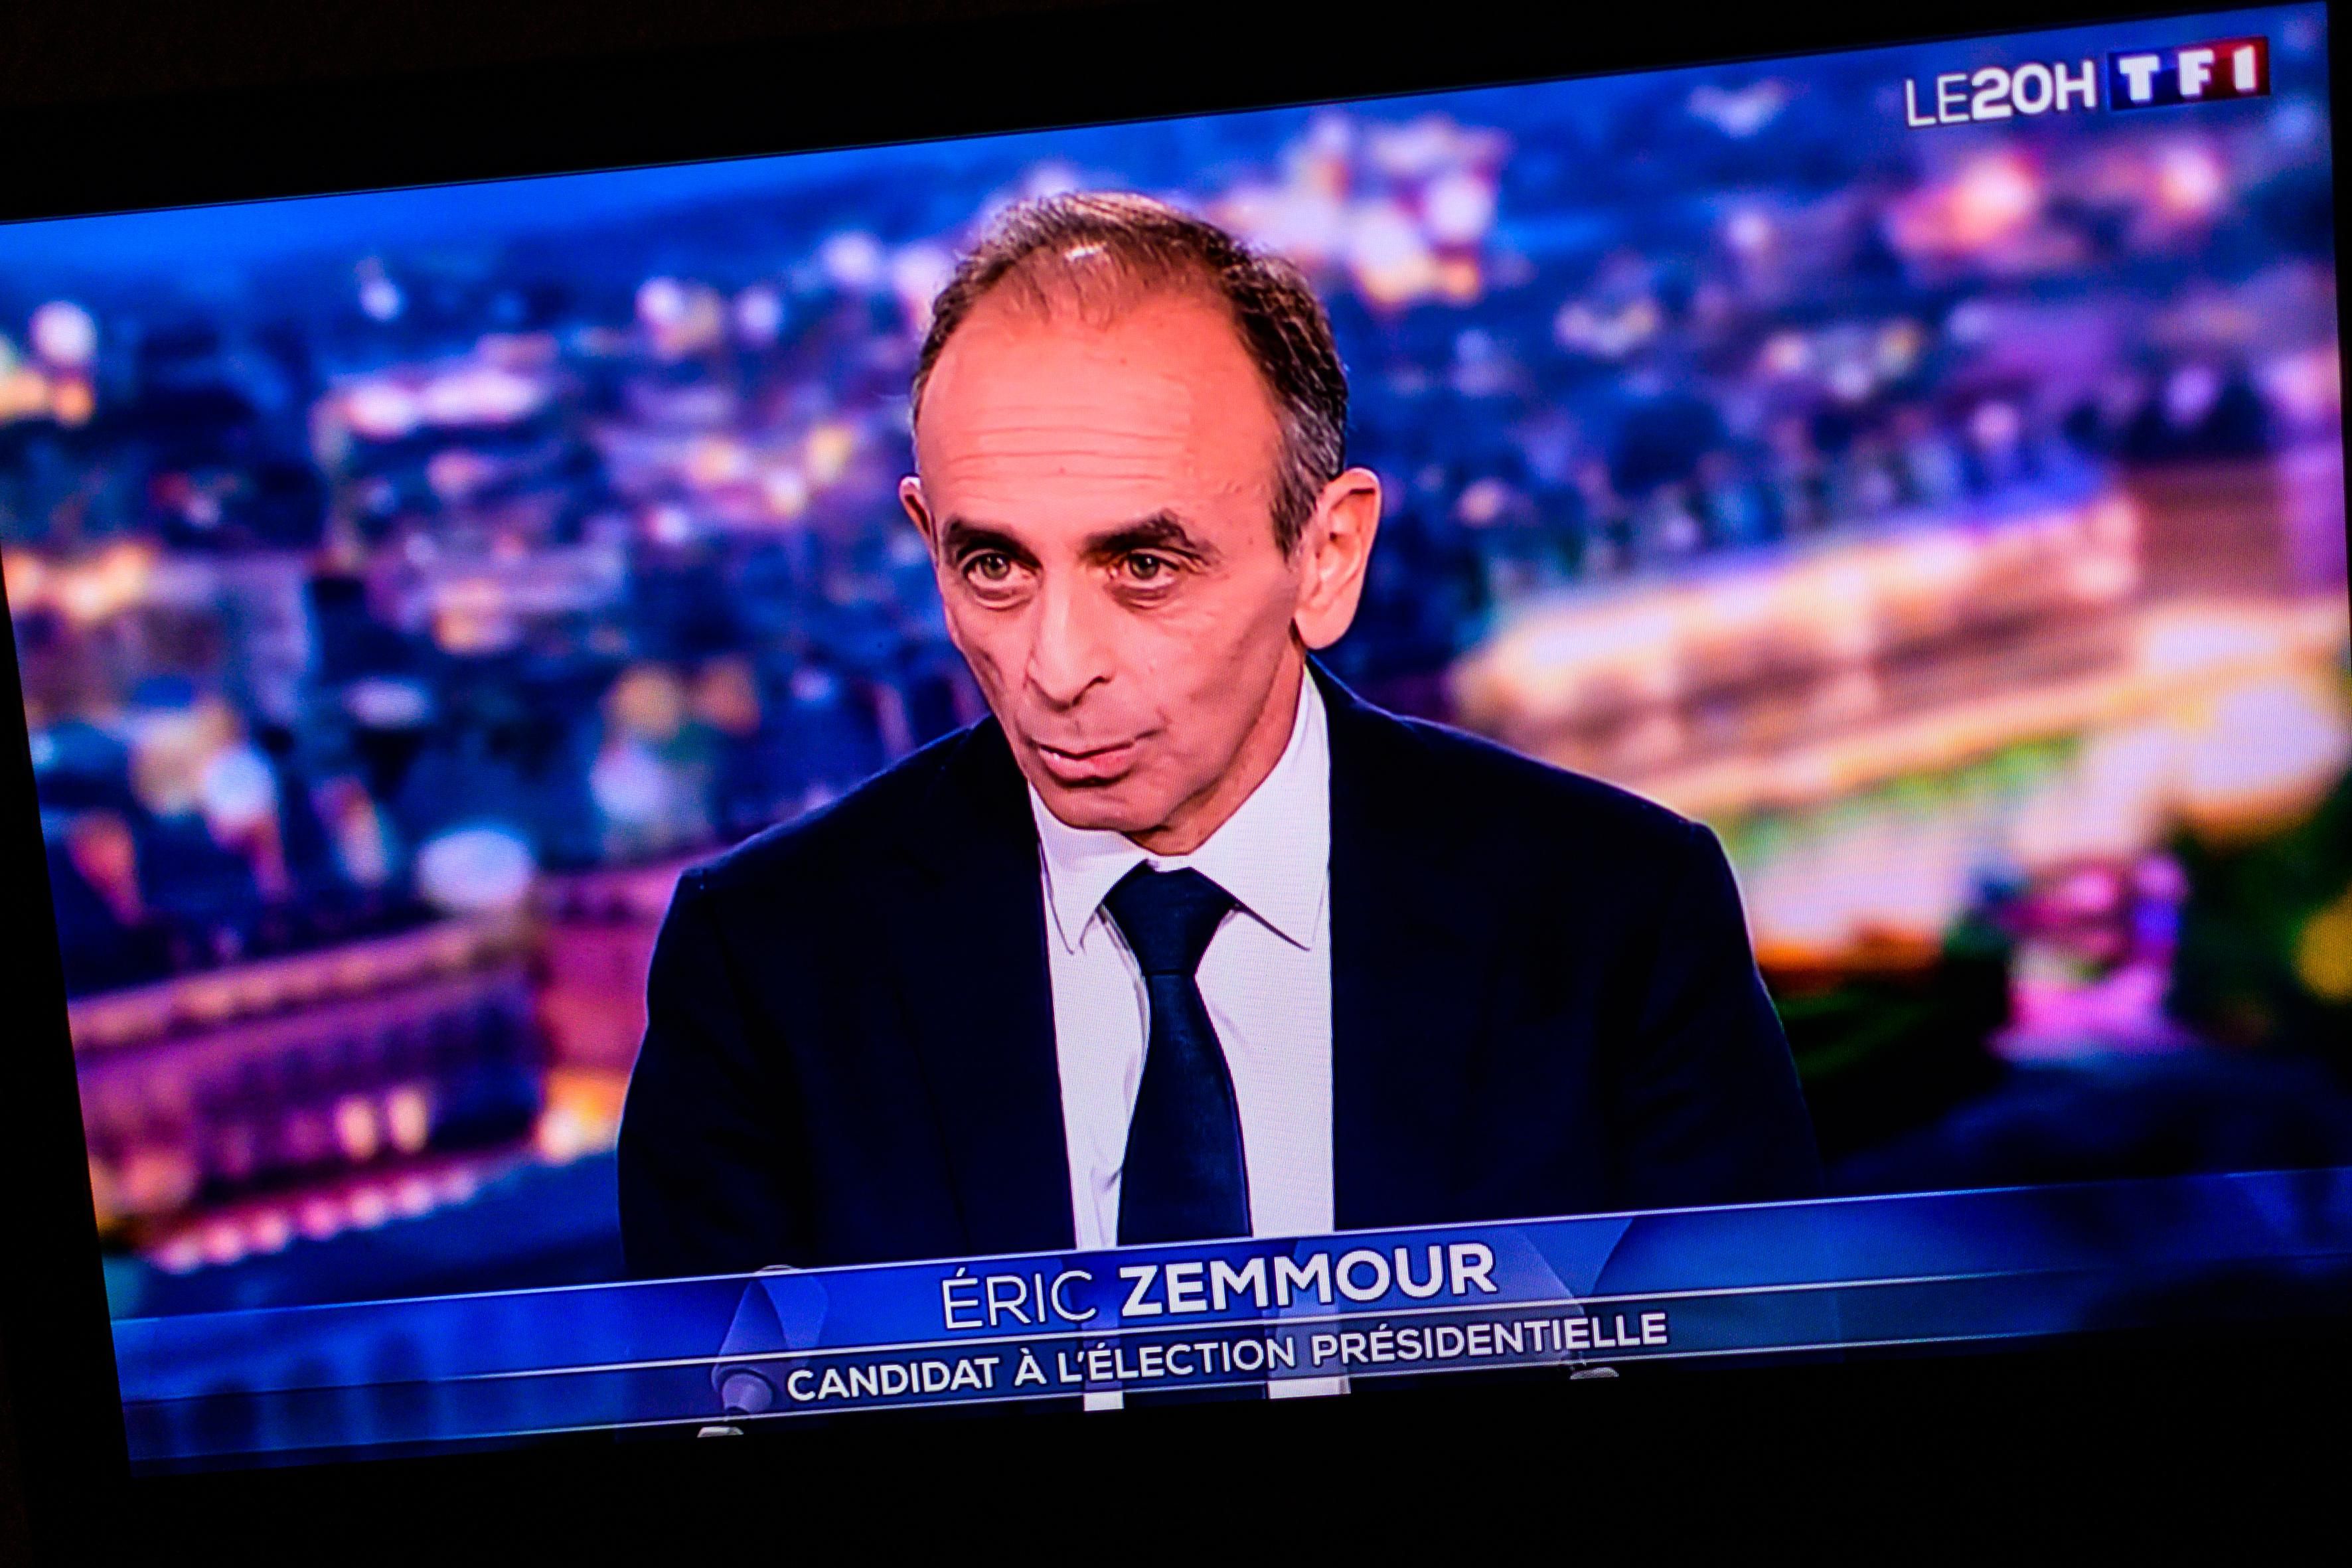 Eric Zemmour, presidential candidate for the 2022 election, speaks on French TV channel TF1.